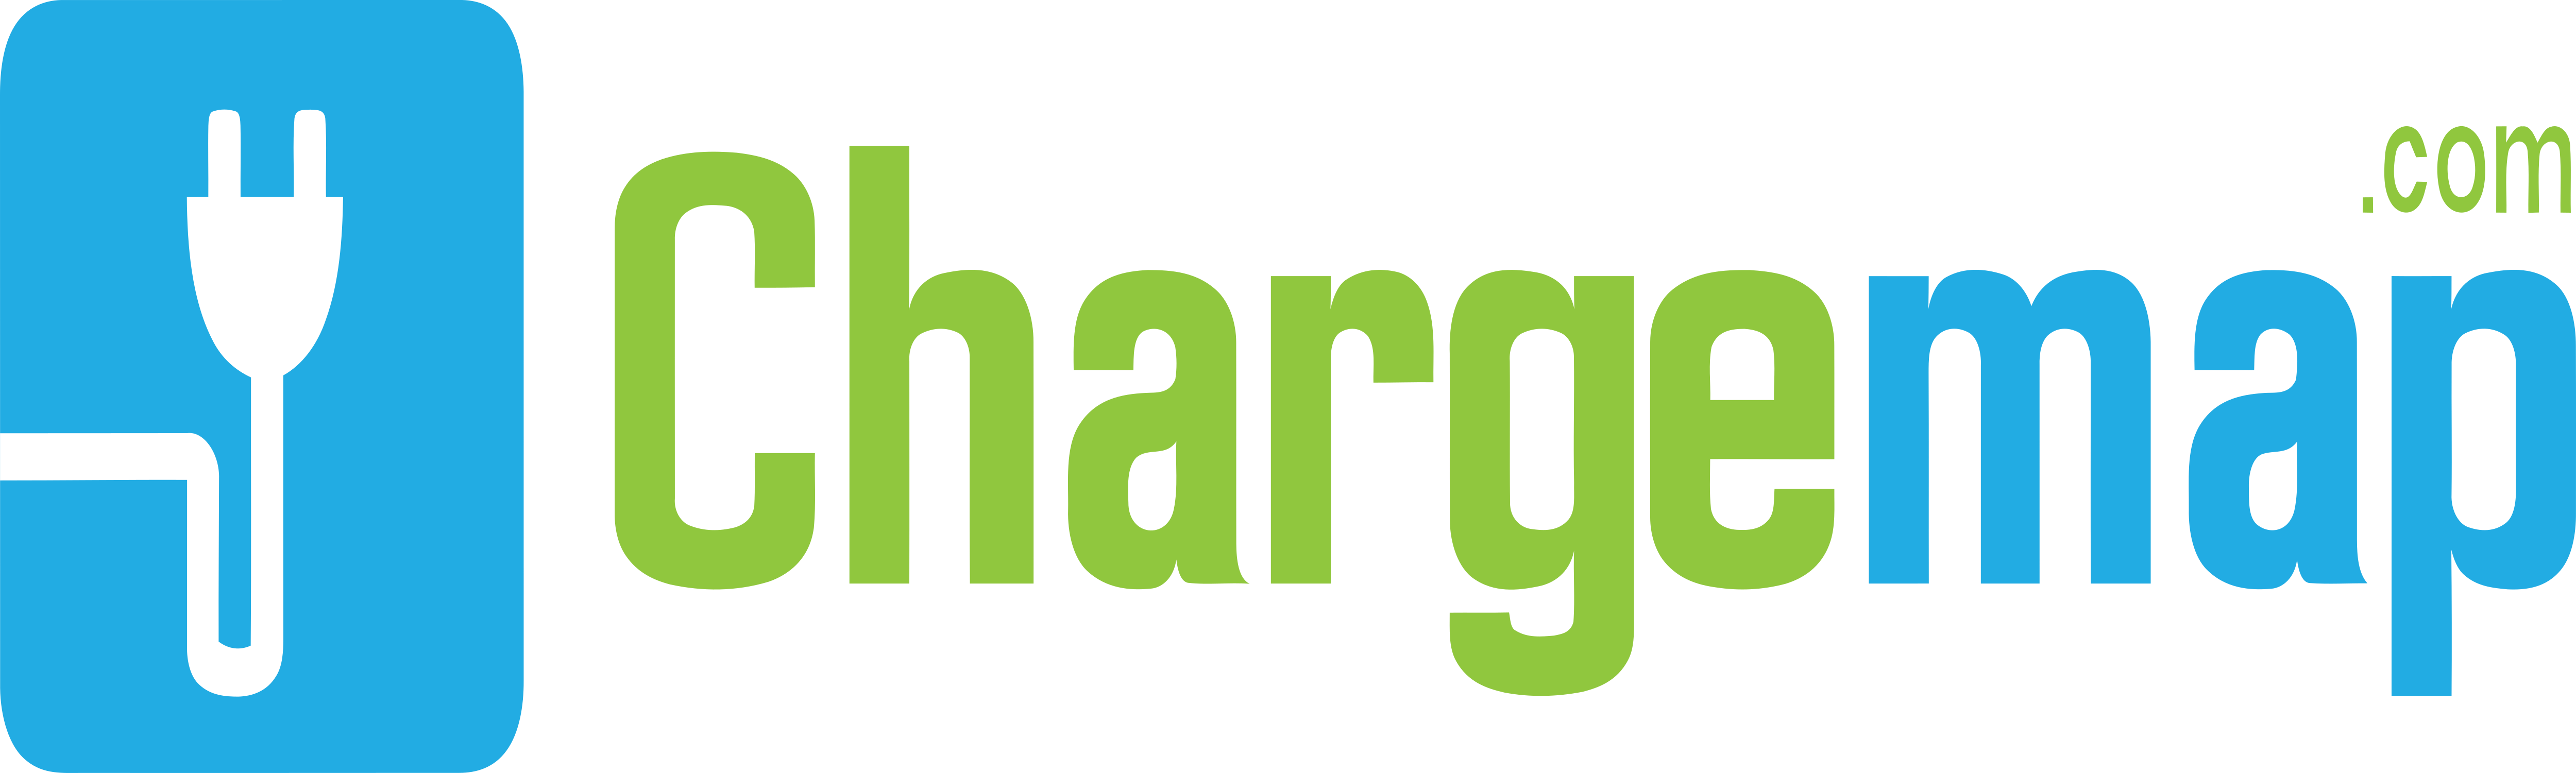 Charge Map – Logos Download